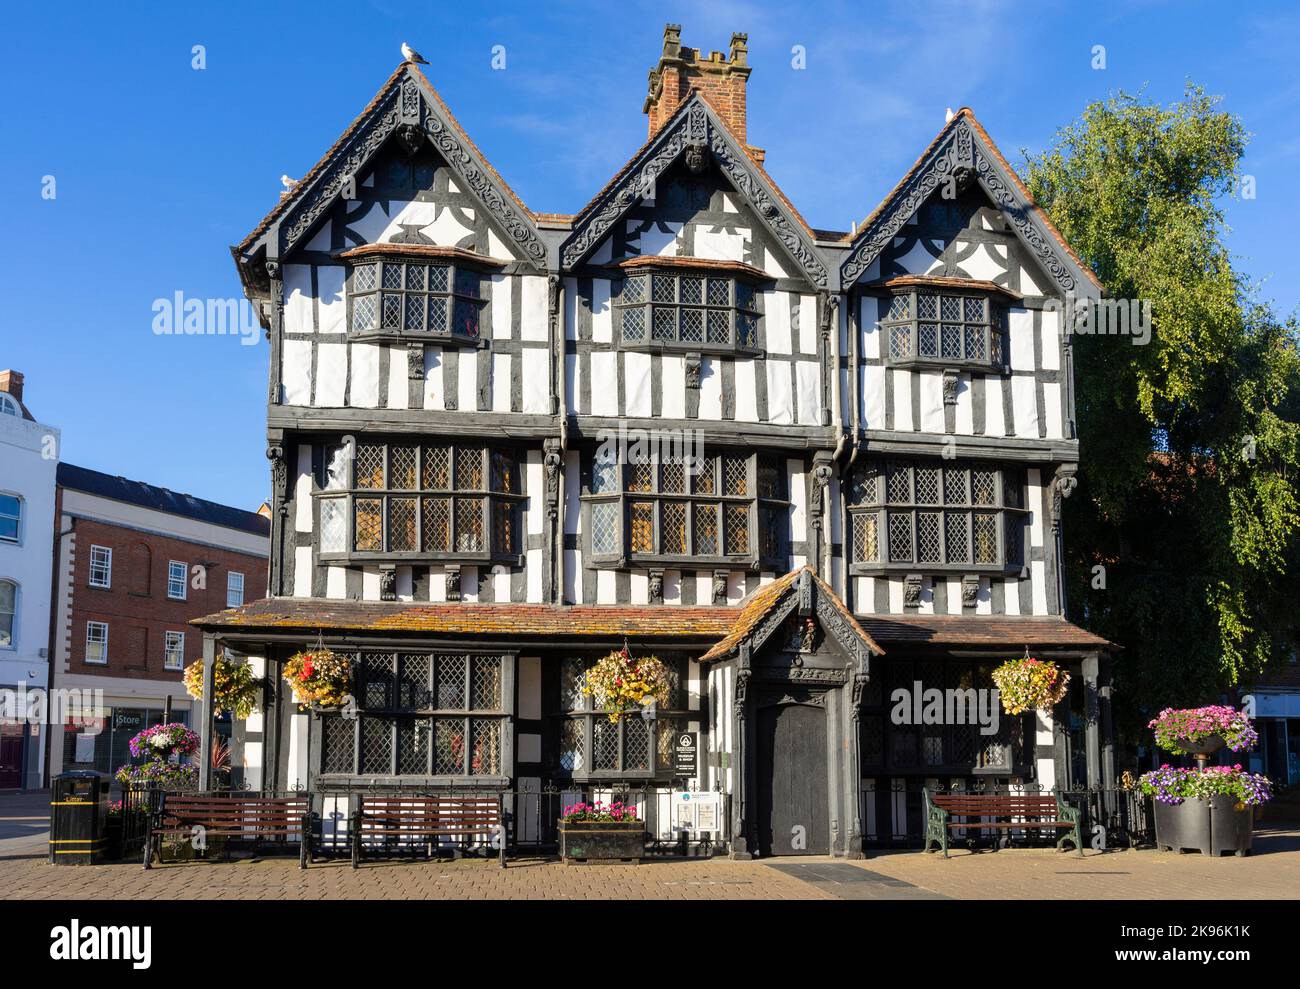 Hereford High Town 17. Century The Old House or Black and White House Museum St. Peter's St High Town Hereford Herefordshire England GB Europa Stockfoto